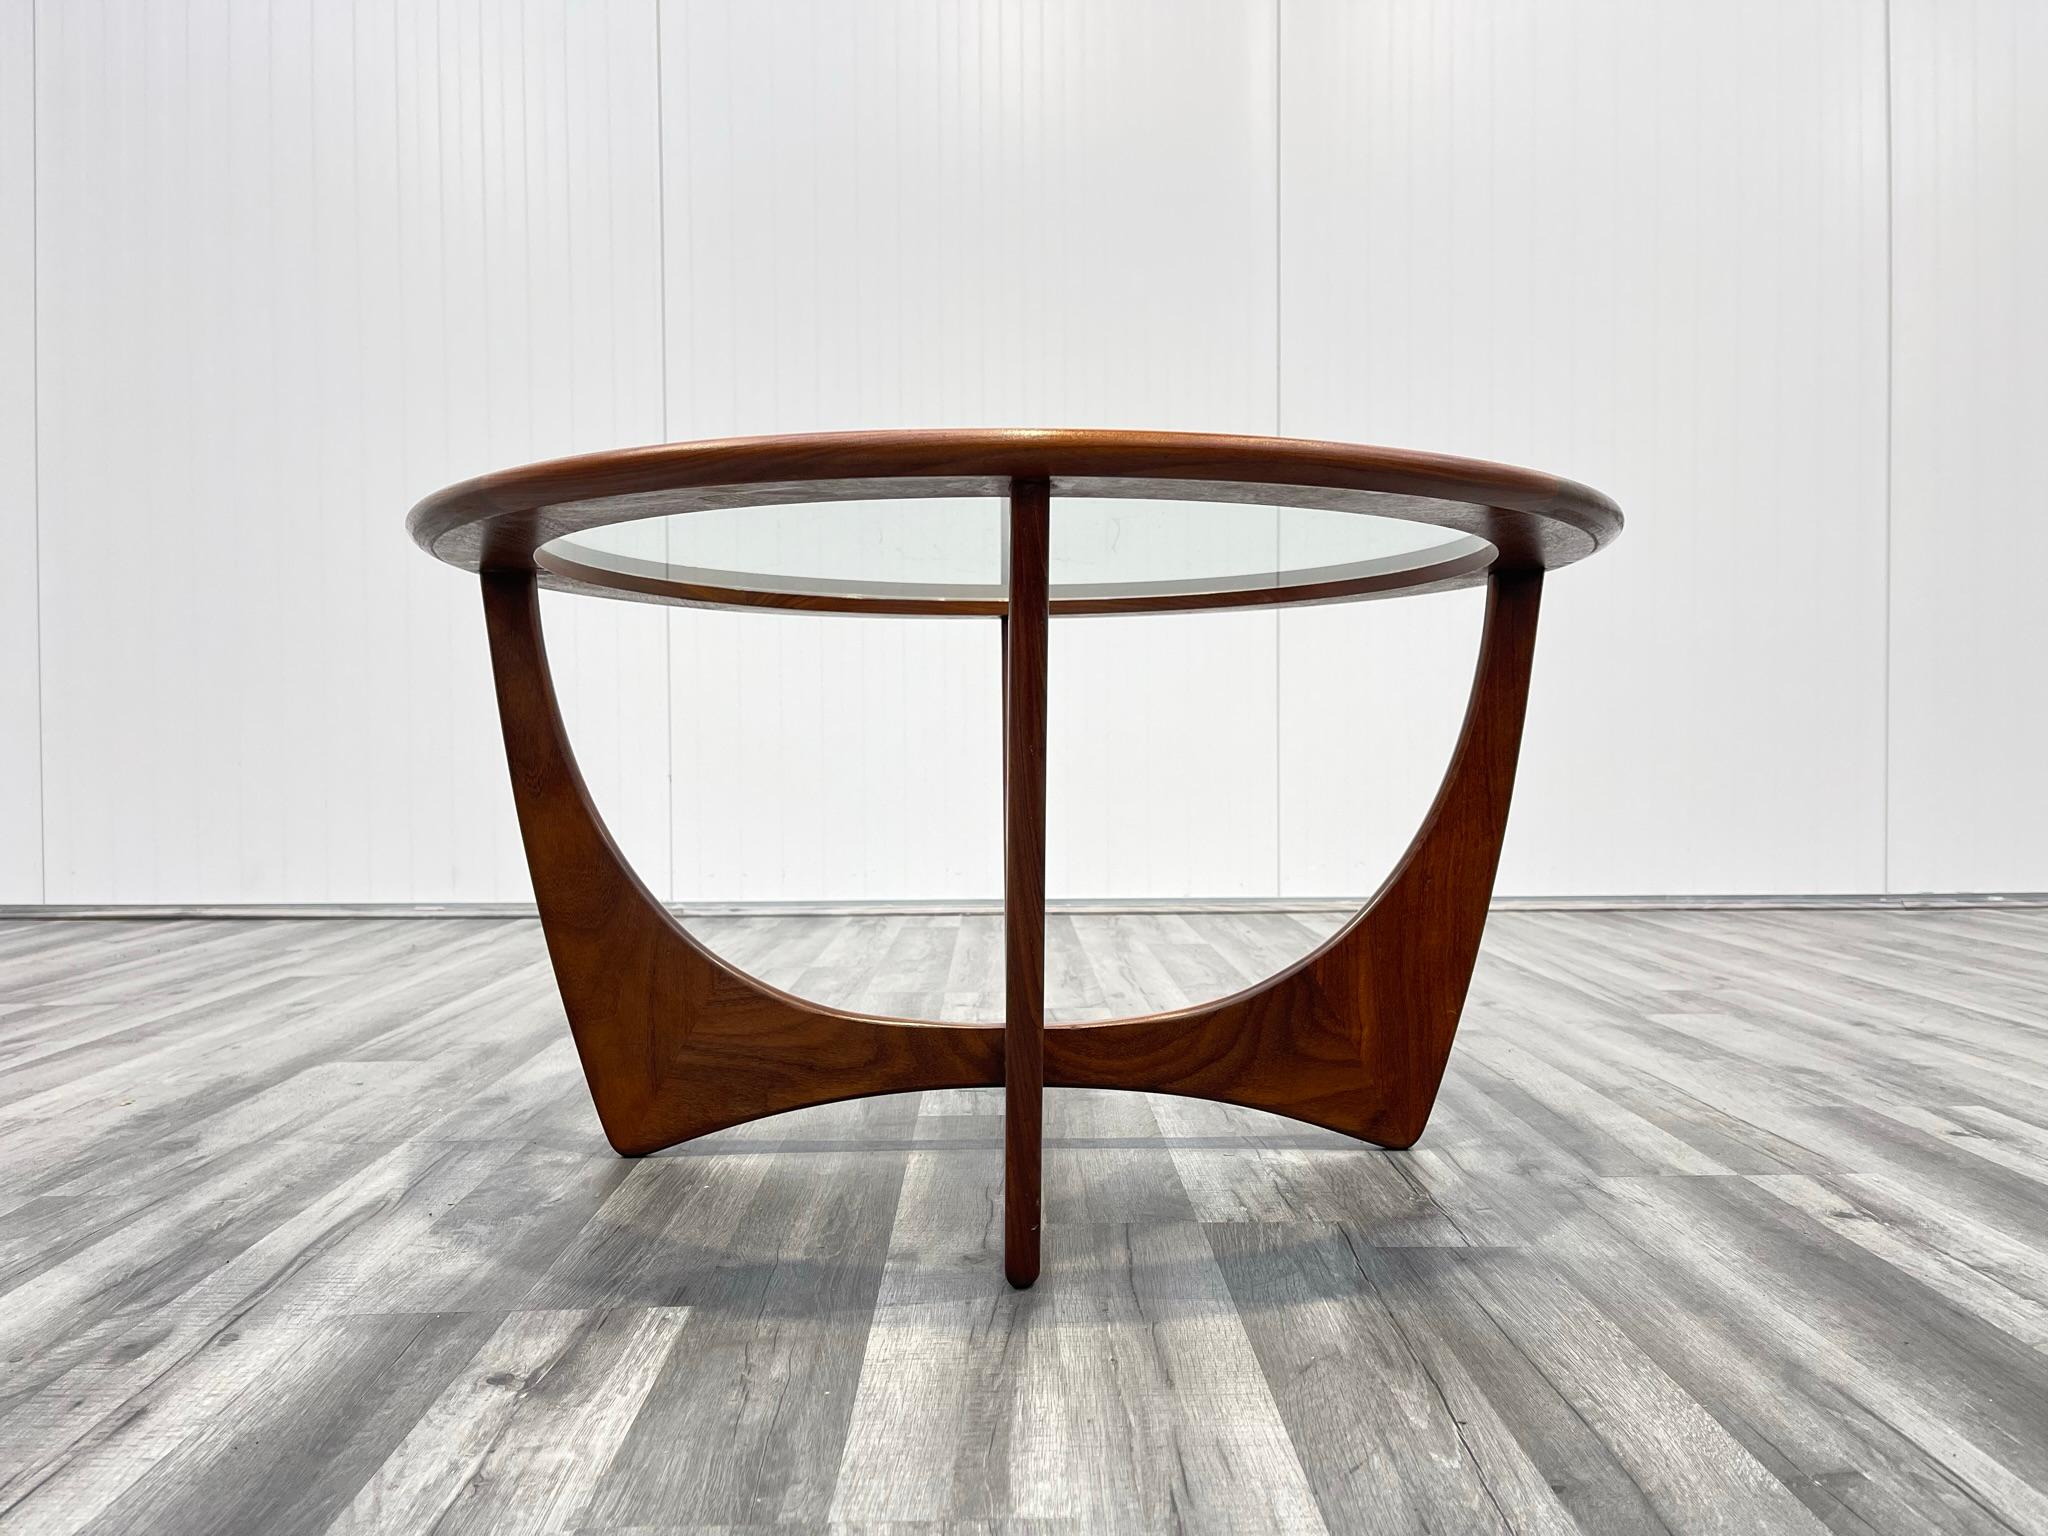 Astro Teak and Glass Circular Mid-Century Coffee Table by VB Wilkins for G Plan In Good Condition For Sale In Kilmarnock, GB